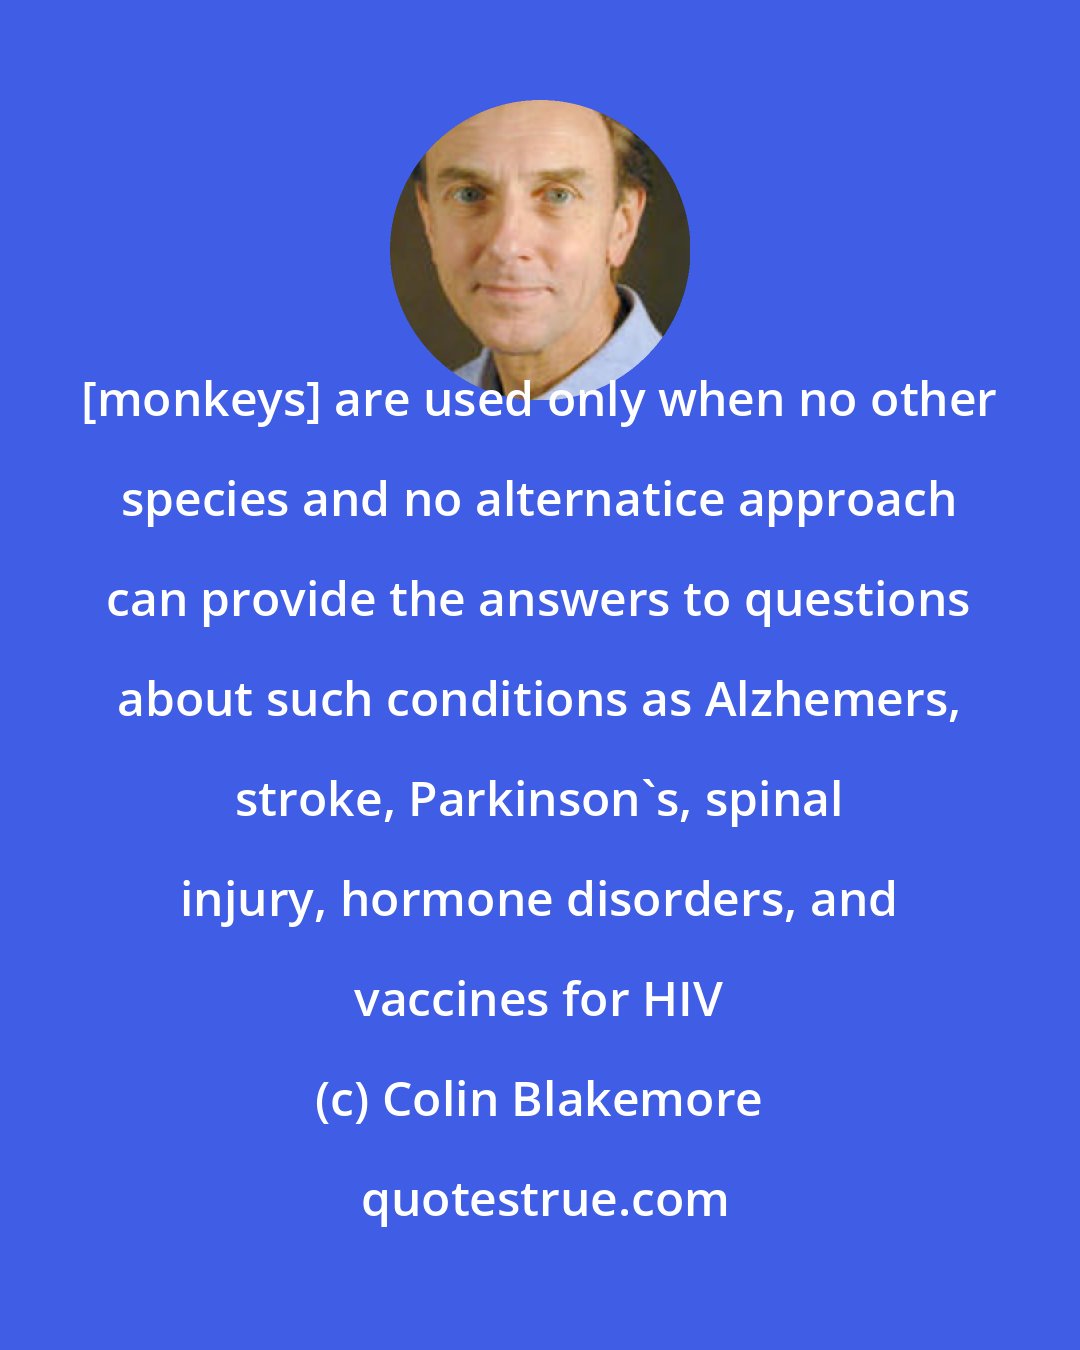 Colin Blakemore: [monkeys] are used only when no other species and no alternatice approach can provide the answers to questions about such conditions as Alzhemers, stroke, Parkinson's, spinal injury, hormone disorders, and vaccines for HIV